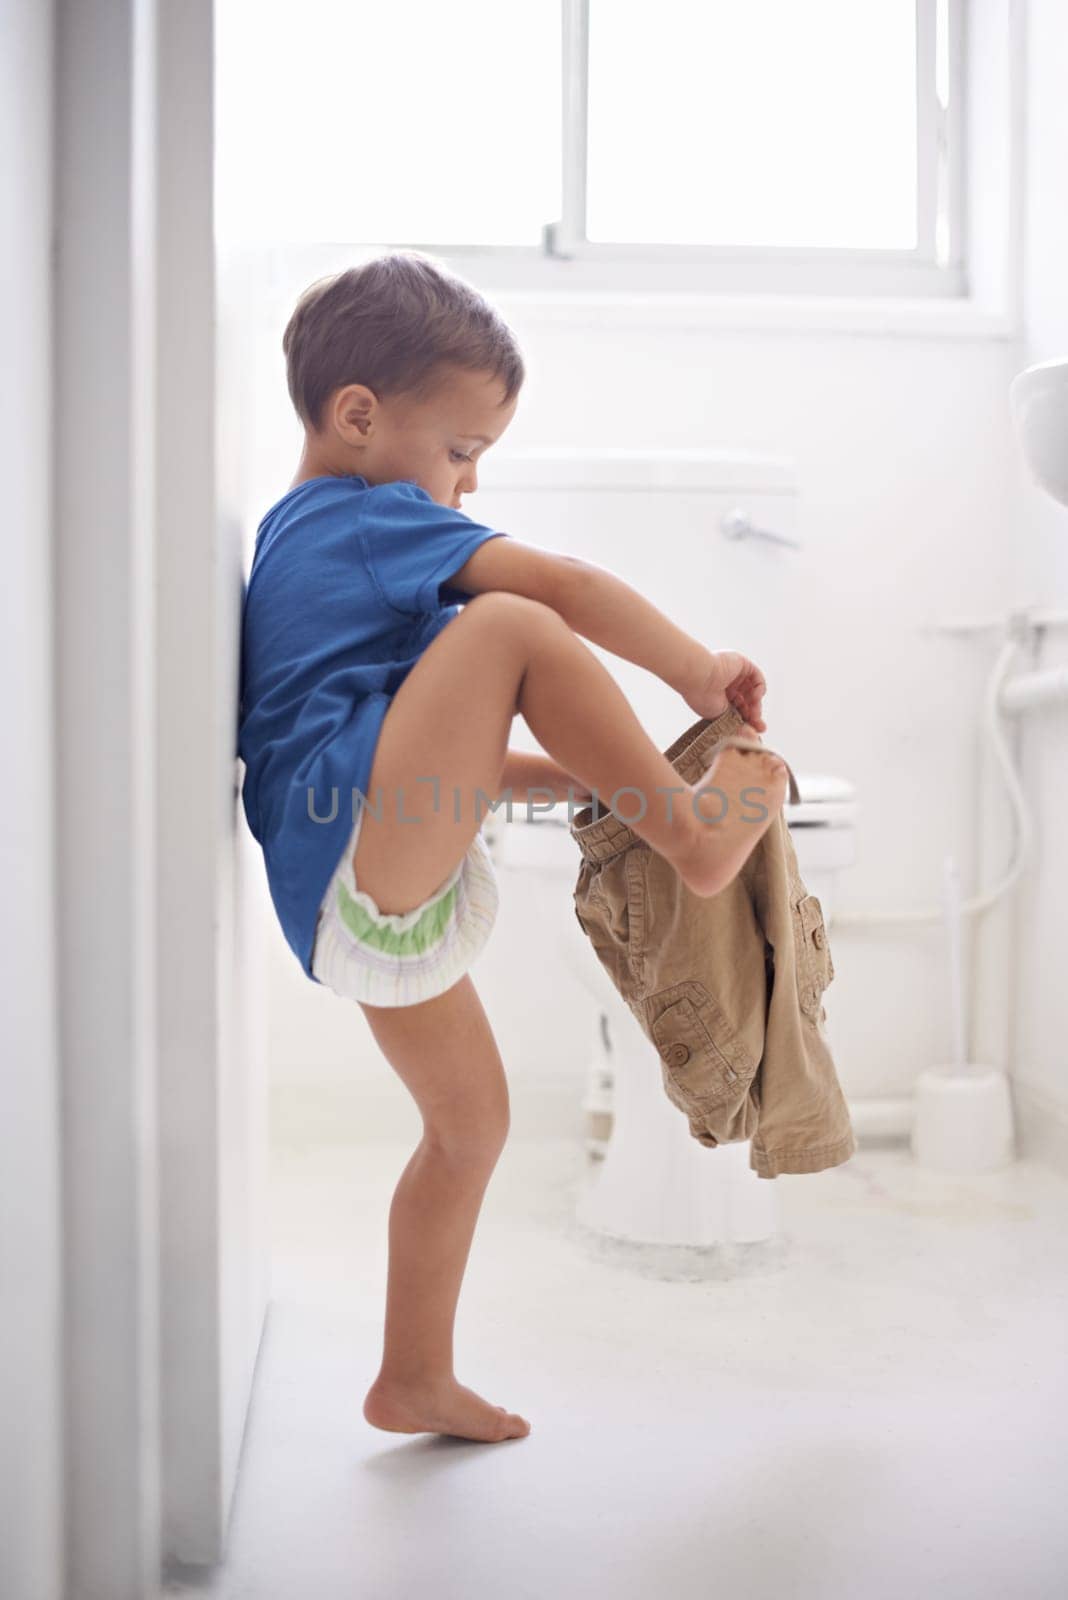 Child, bathroom and toilet training for learning growth, milestone or hygiene. Male person, kid diaper and pants or step for development in home for parent care for toddler teaching, health or love.